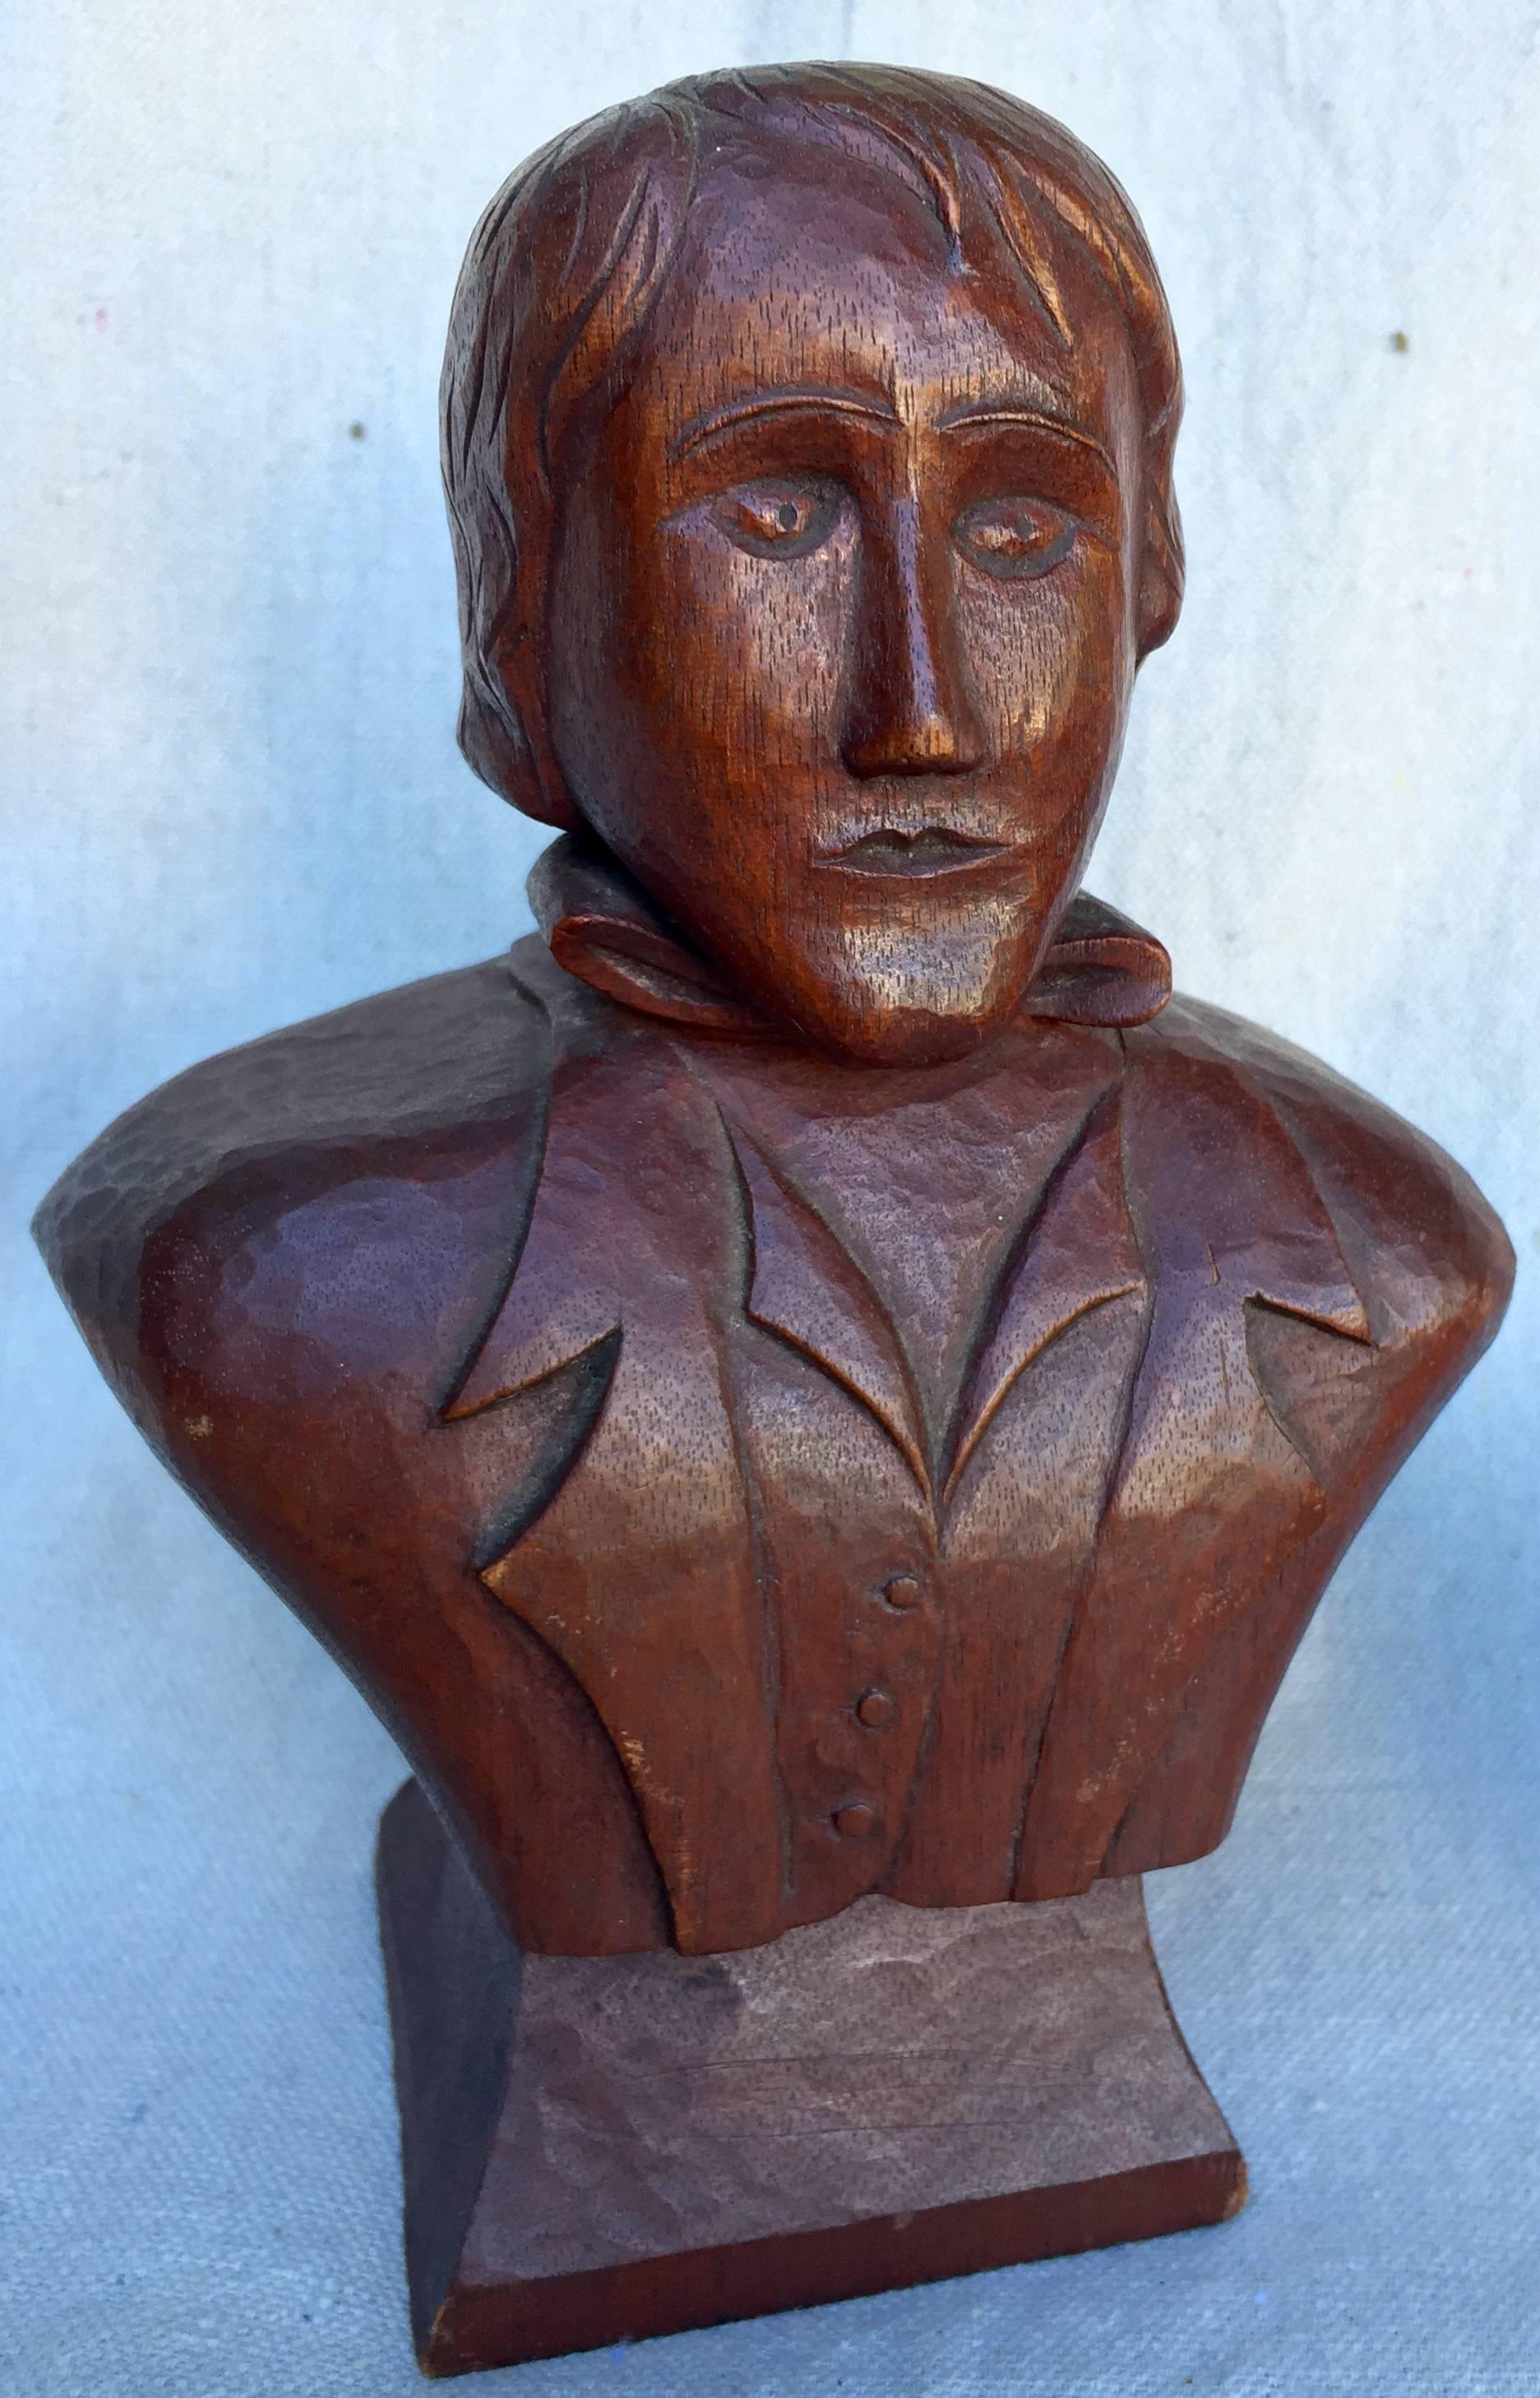 Crisply carved mahogany bust of a handsome young man in waistcoat and jacket and tie. String sculptural presence and interesting detail on this late 19th century, American Folk Art carving.